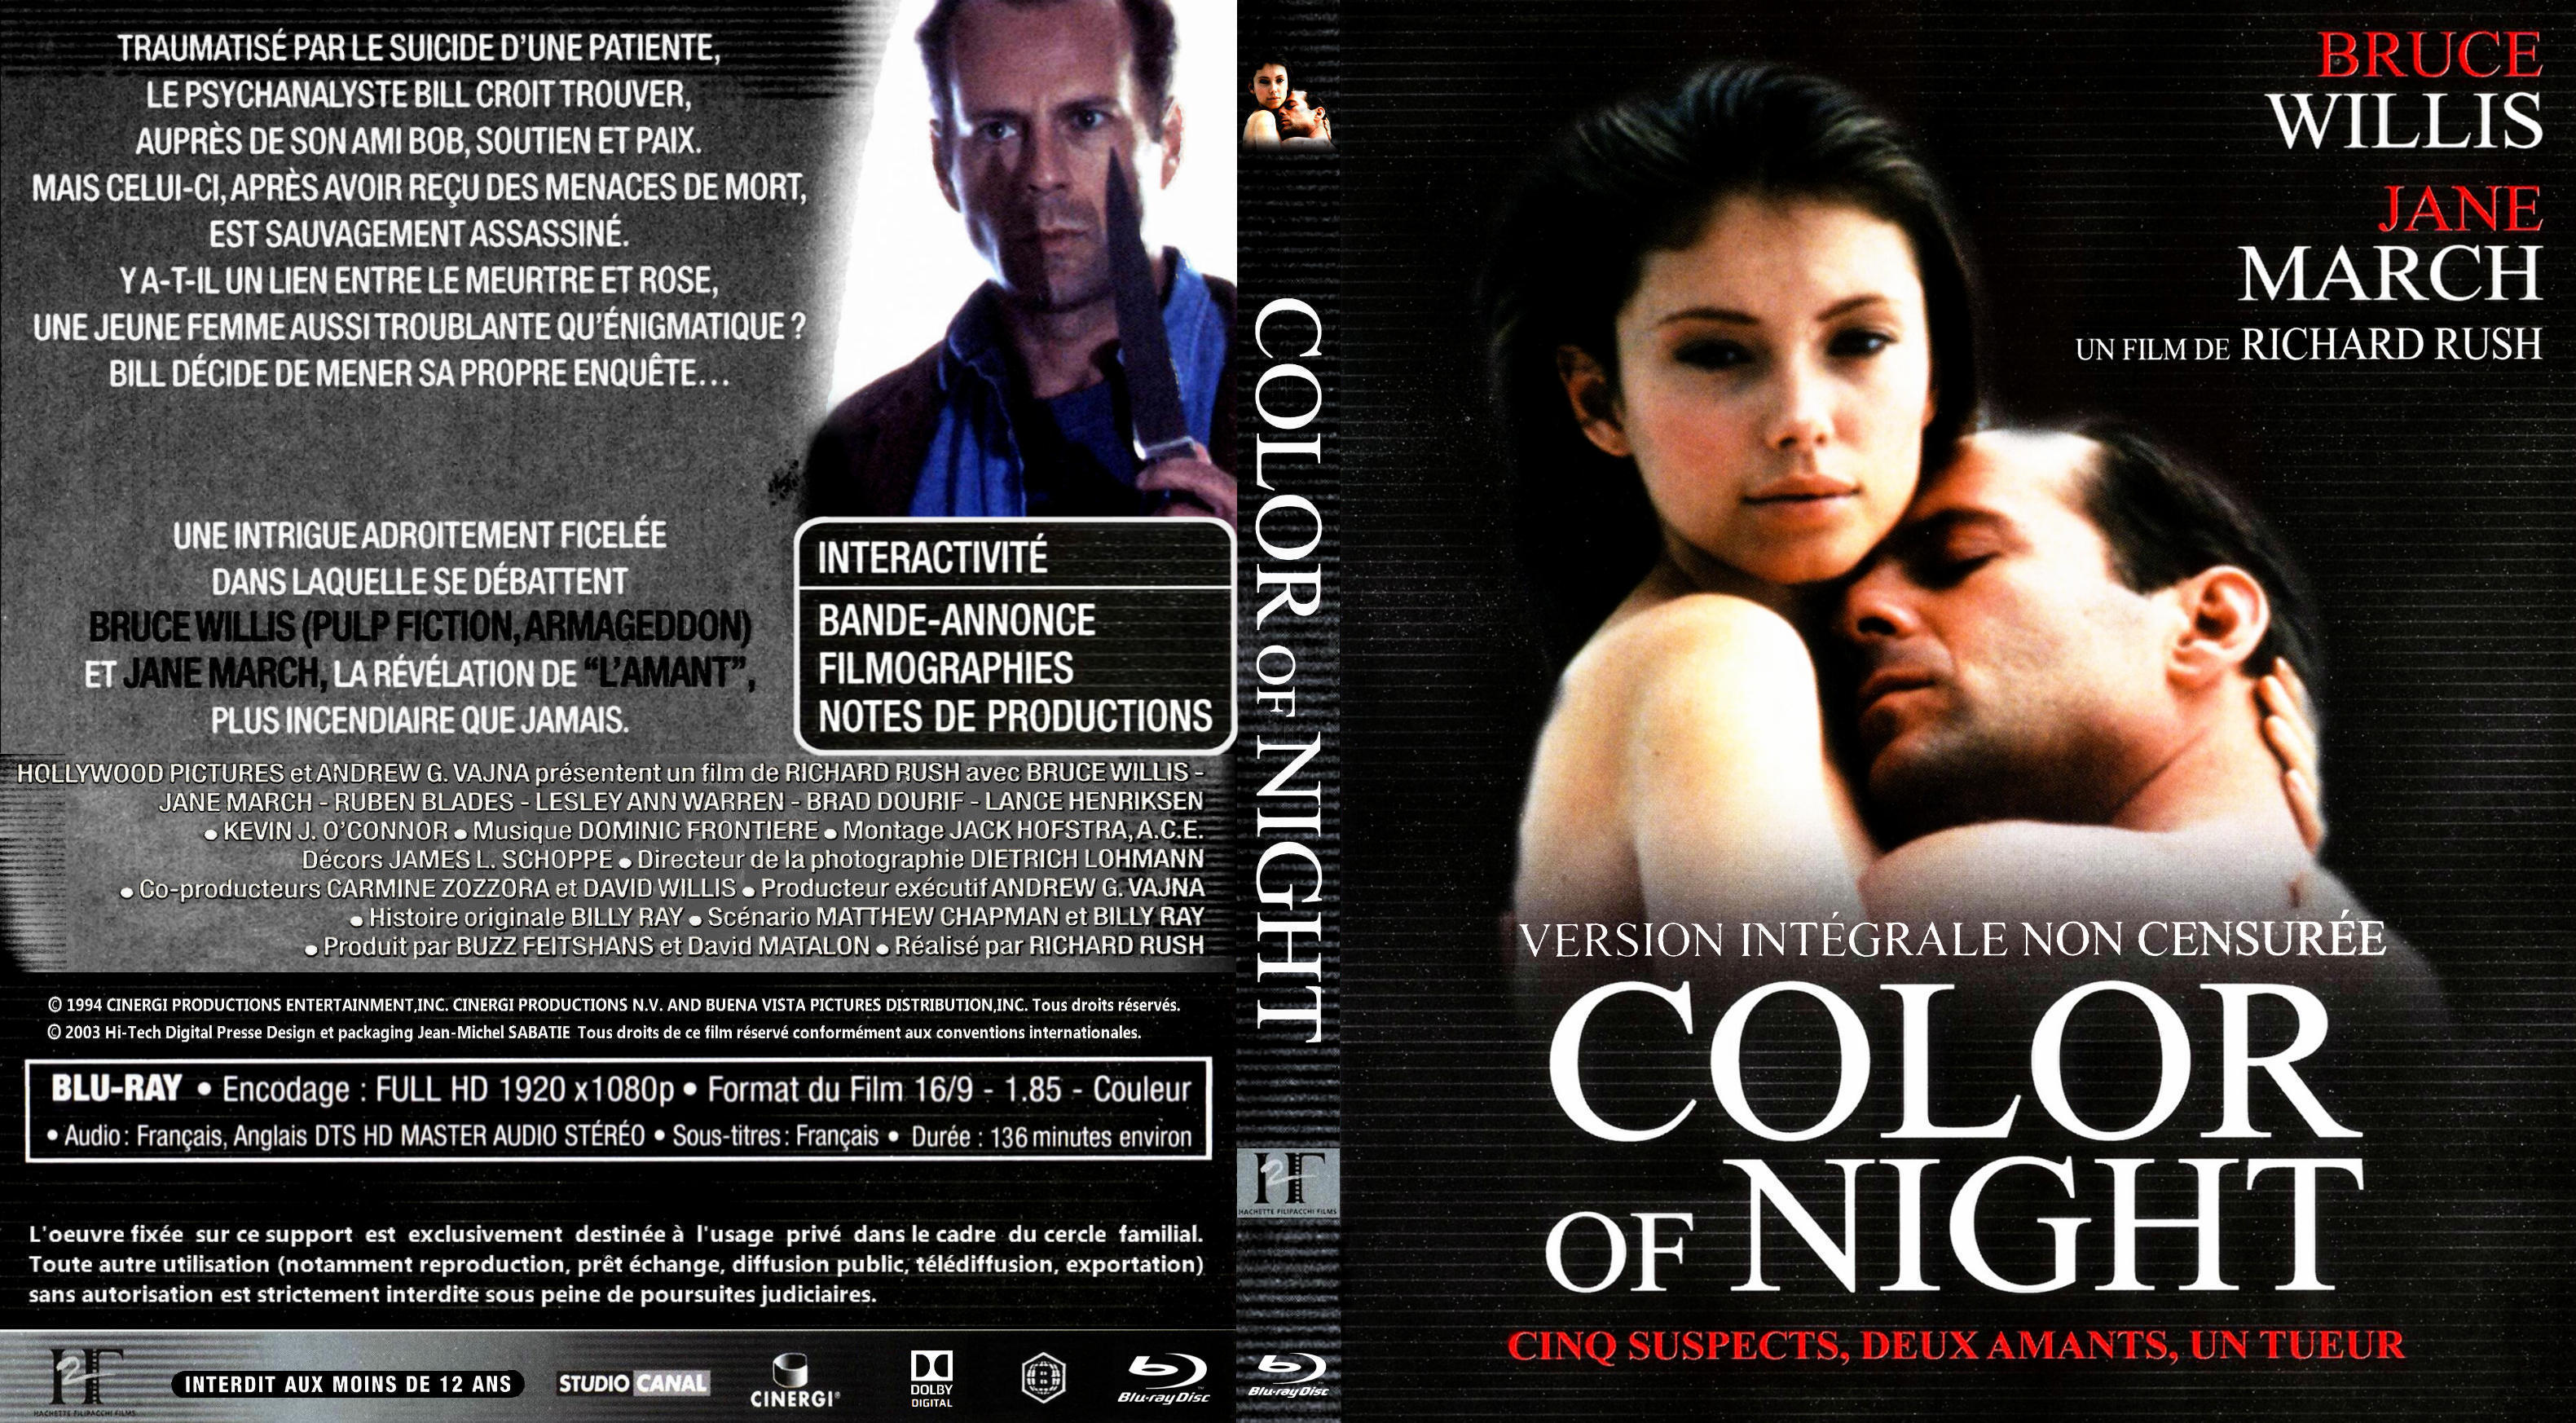 Jaquette DVD Color of Night custom (BLU-RAY)